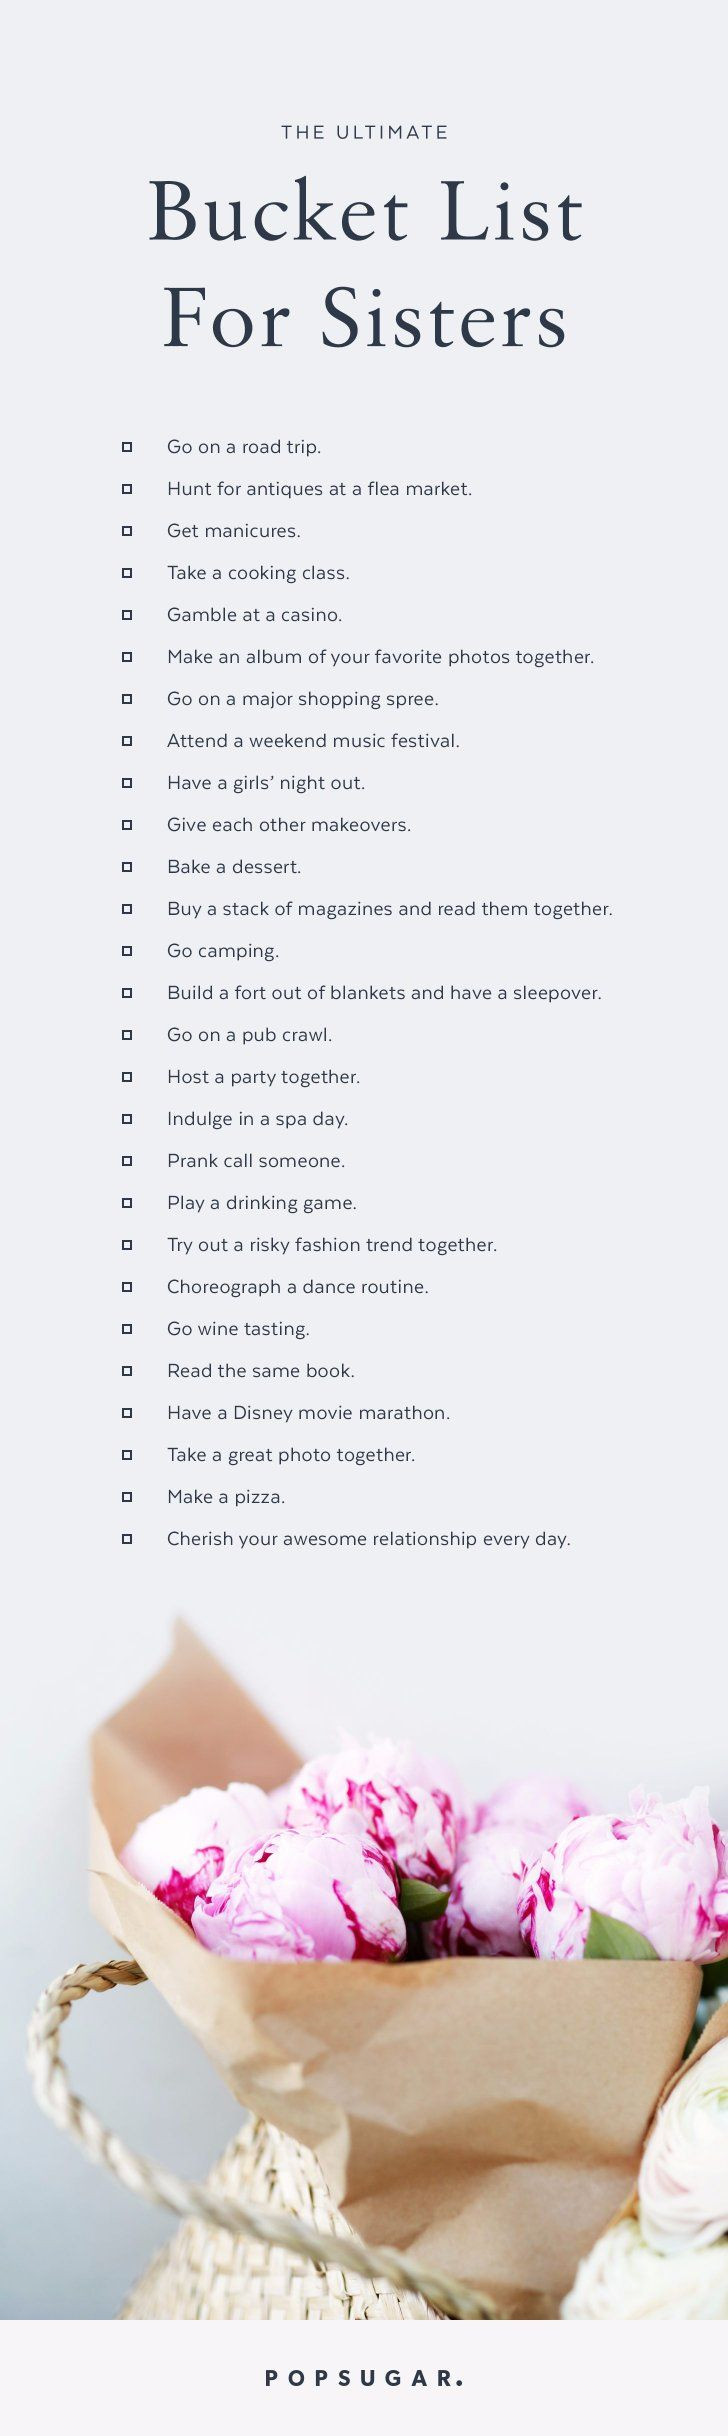 Quote About Sisters Birthday
 The Ultimate Bucket List For Sisters